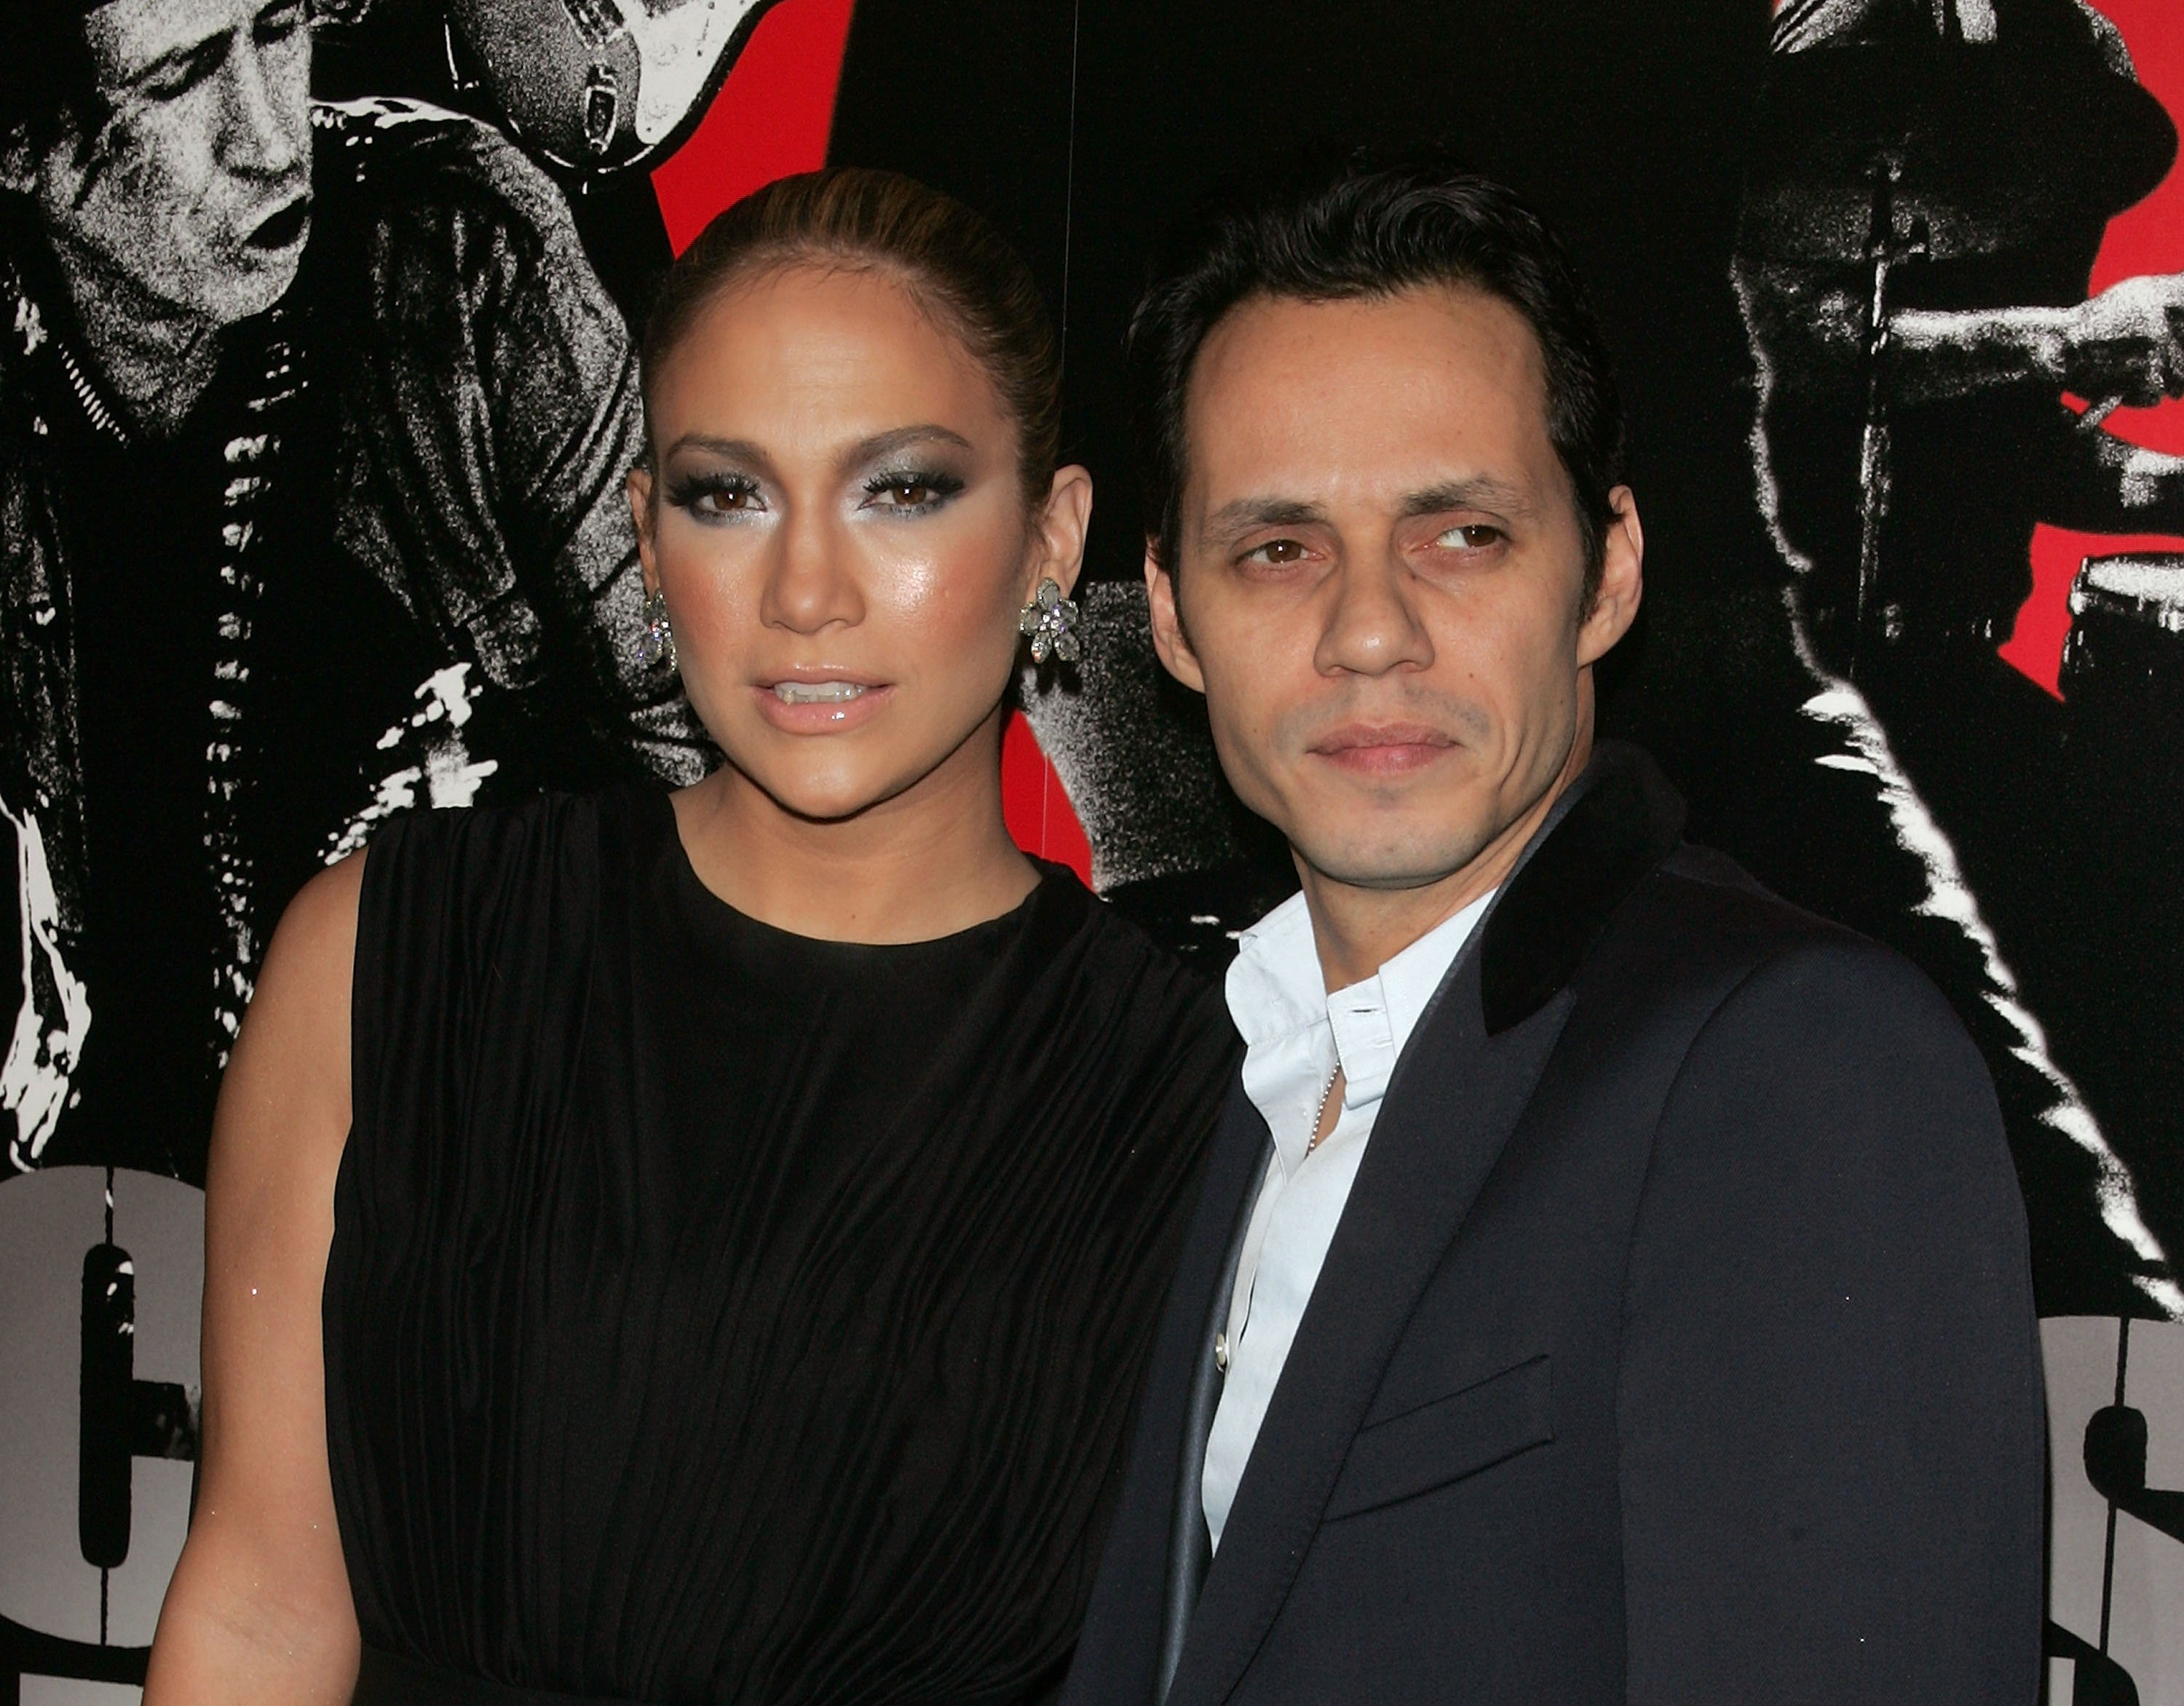 Jennifer Lopez and Marc Anthony pictured arriving at the "Shine A Light" premiere at the Ziegfeld Theater on March 30, 2008 in New York City. / Source: Getty Images